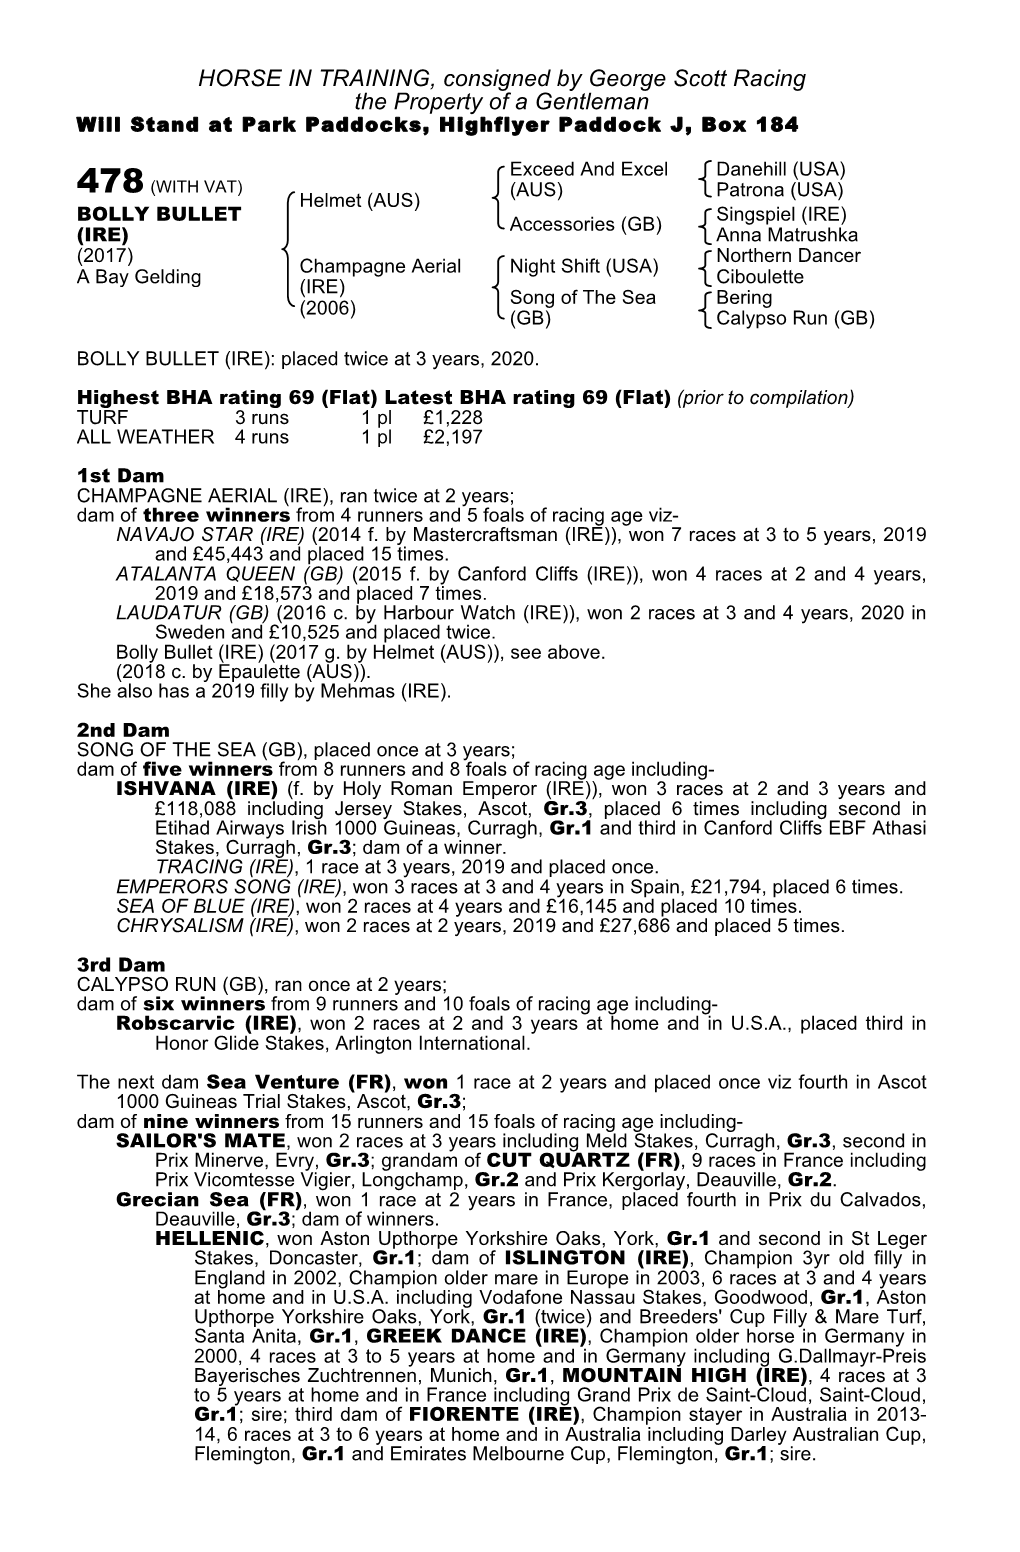 HORSE in TRAINING, Consigned by George Scott Racing the Property of a Gentleman Will Stand at Park Paddocks, Highflyer Paddock J, Box 184